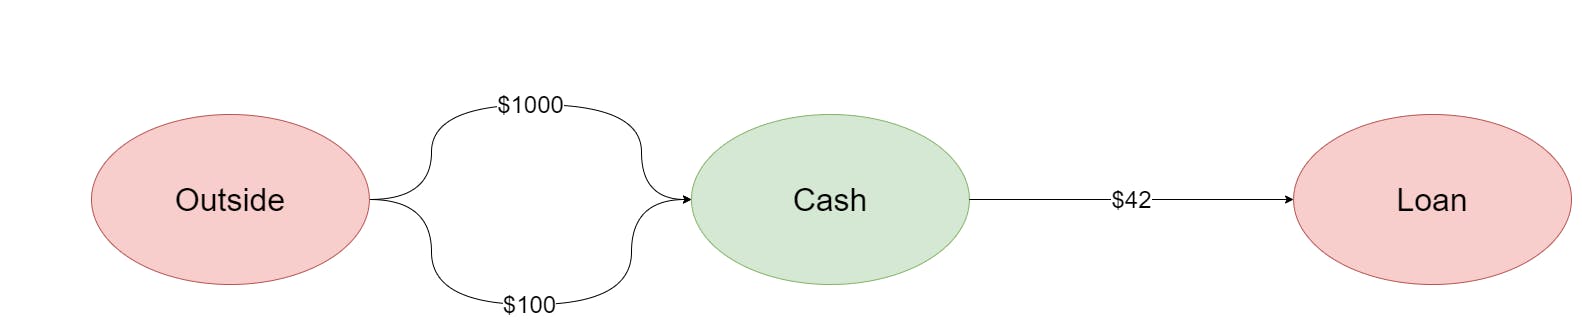 A graph of three nodes, Outside, Cash, and Loan, with two arrows between Outside and Cash labeled $1000 and $100; also still having the arrow between Cash and Loan labeled $42